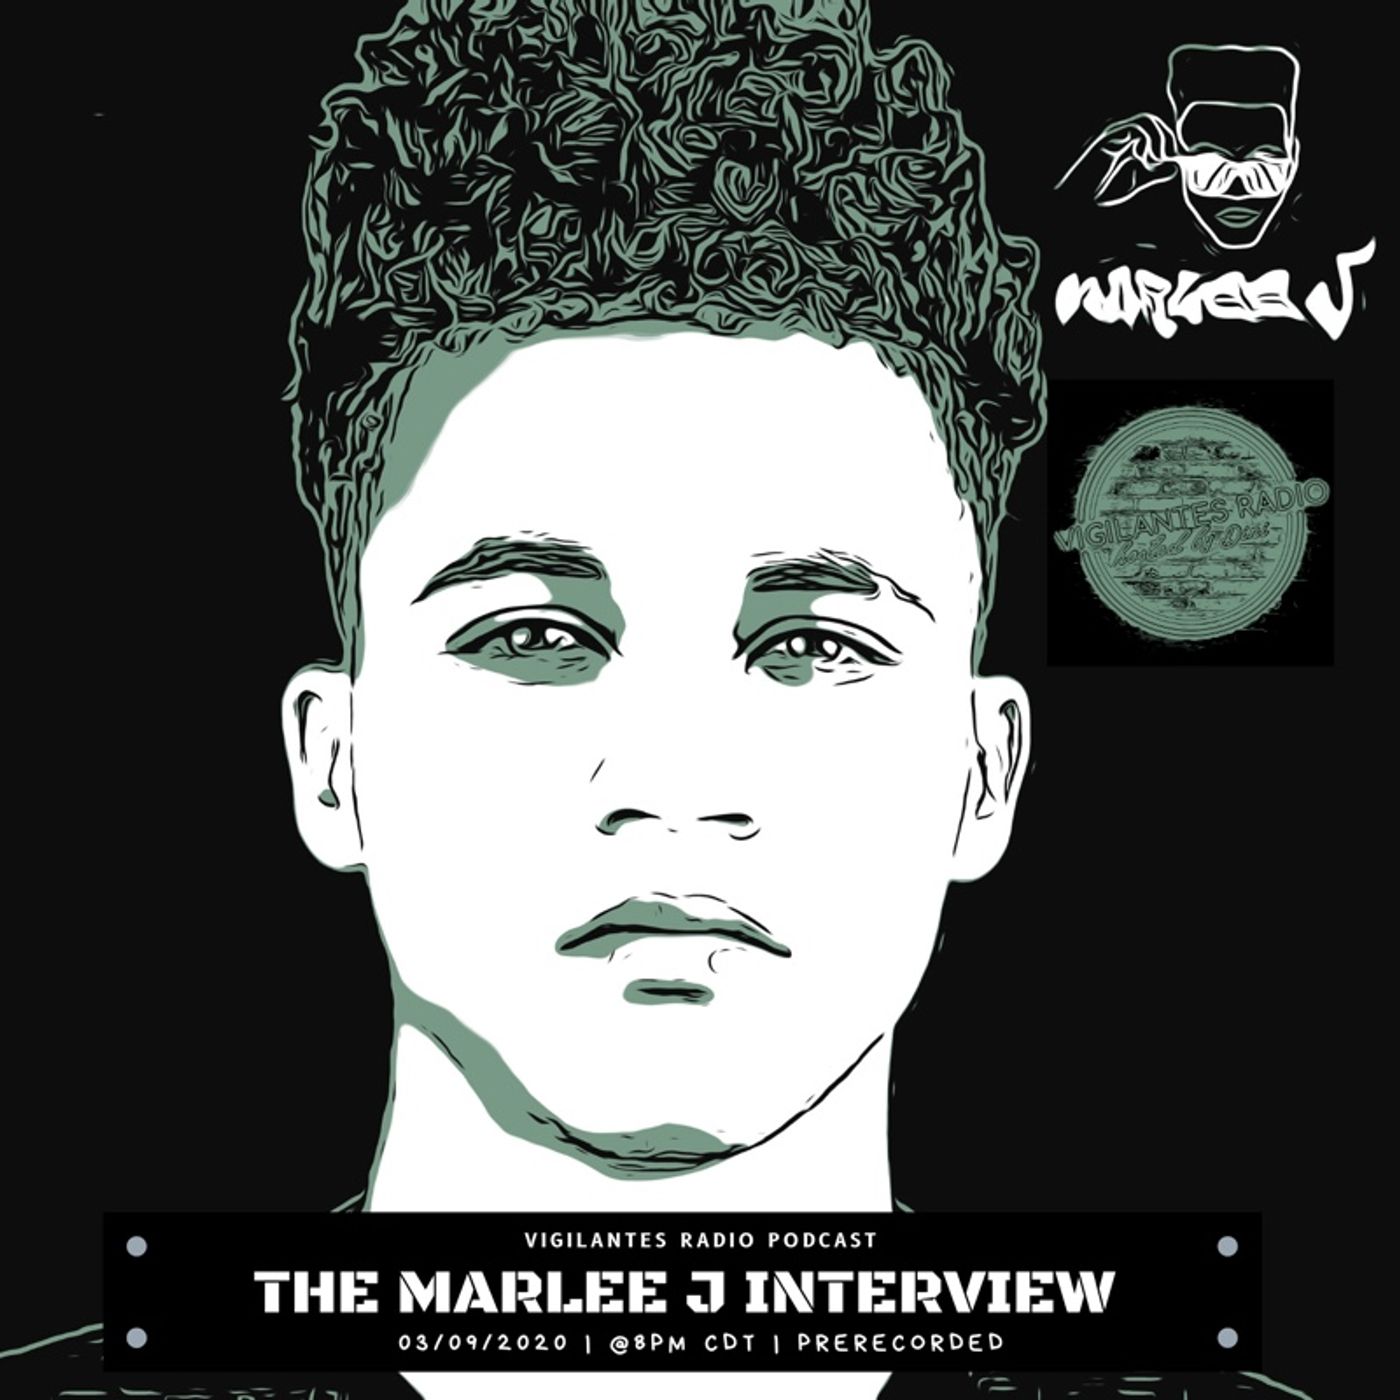 The Marlee J Interview. Image